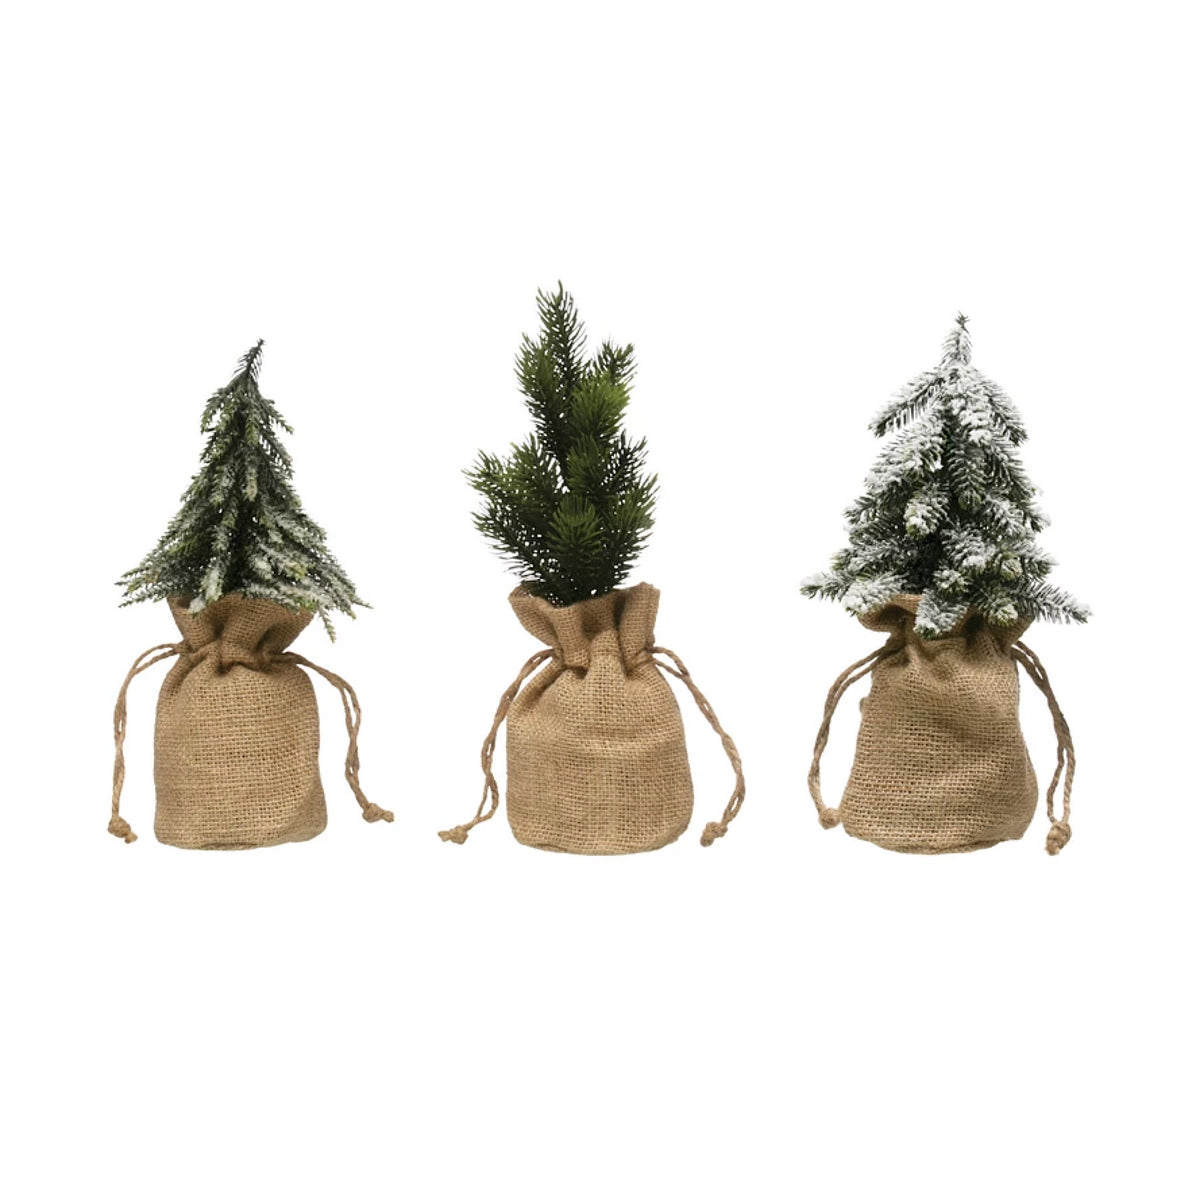 Faux Pines Tree with Burlap Base, 3 Styles